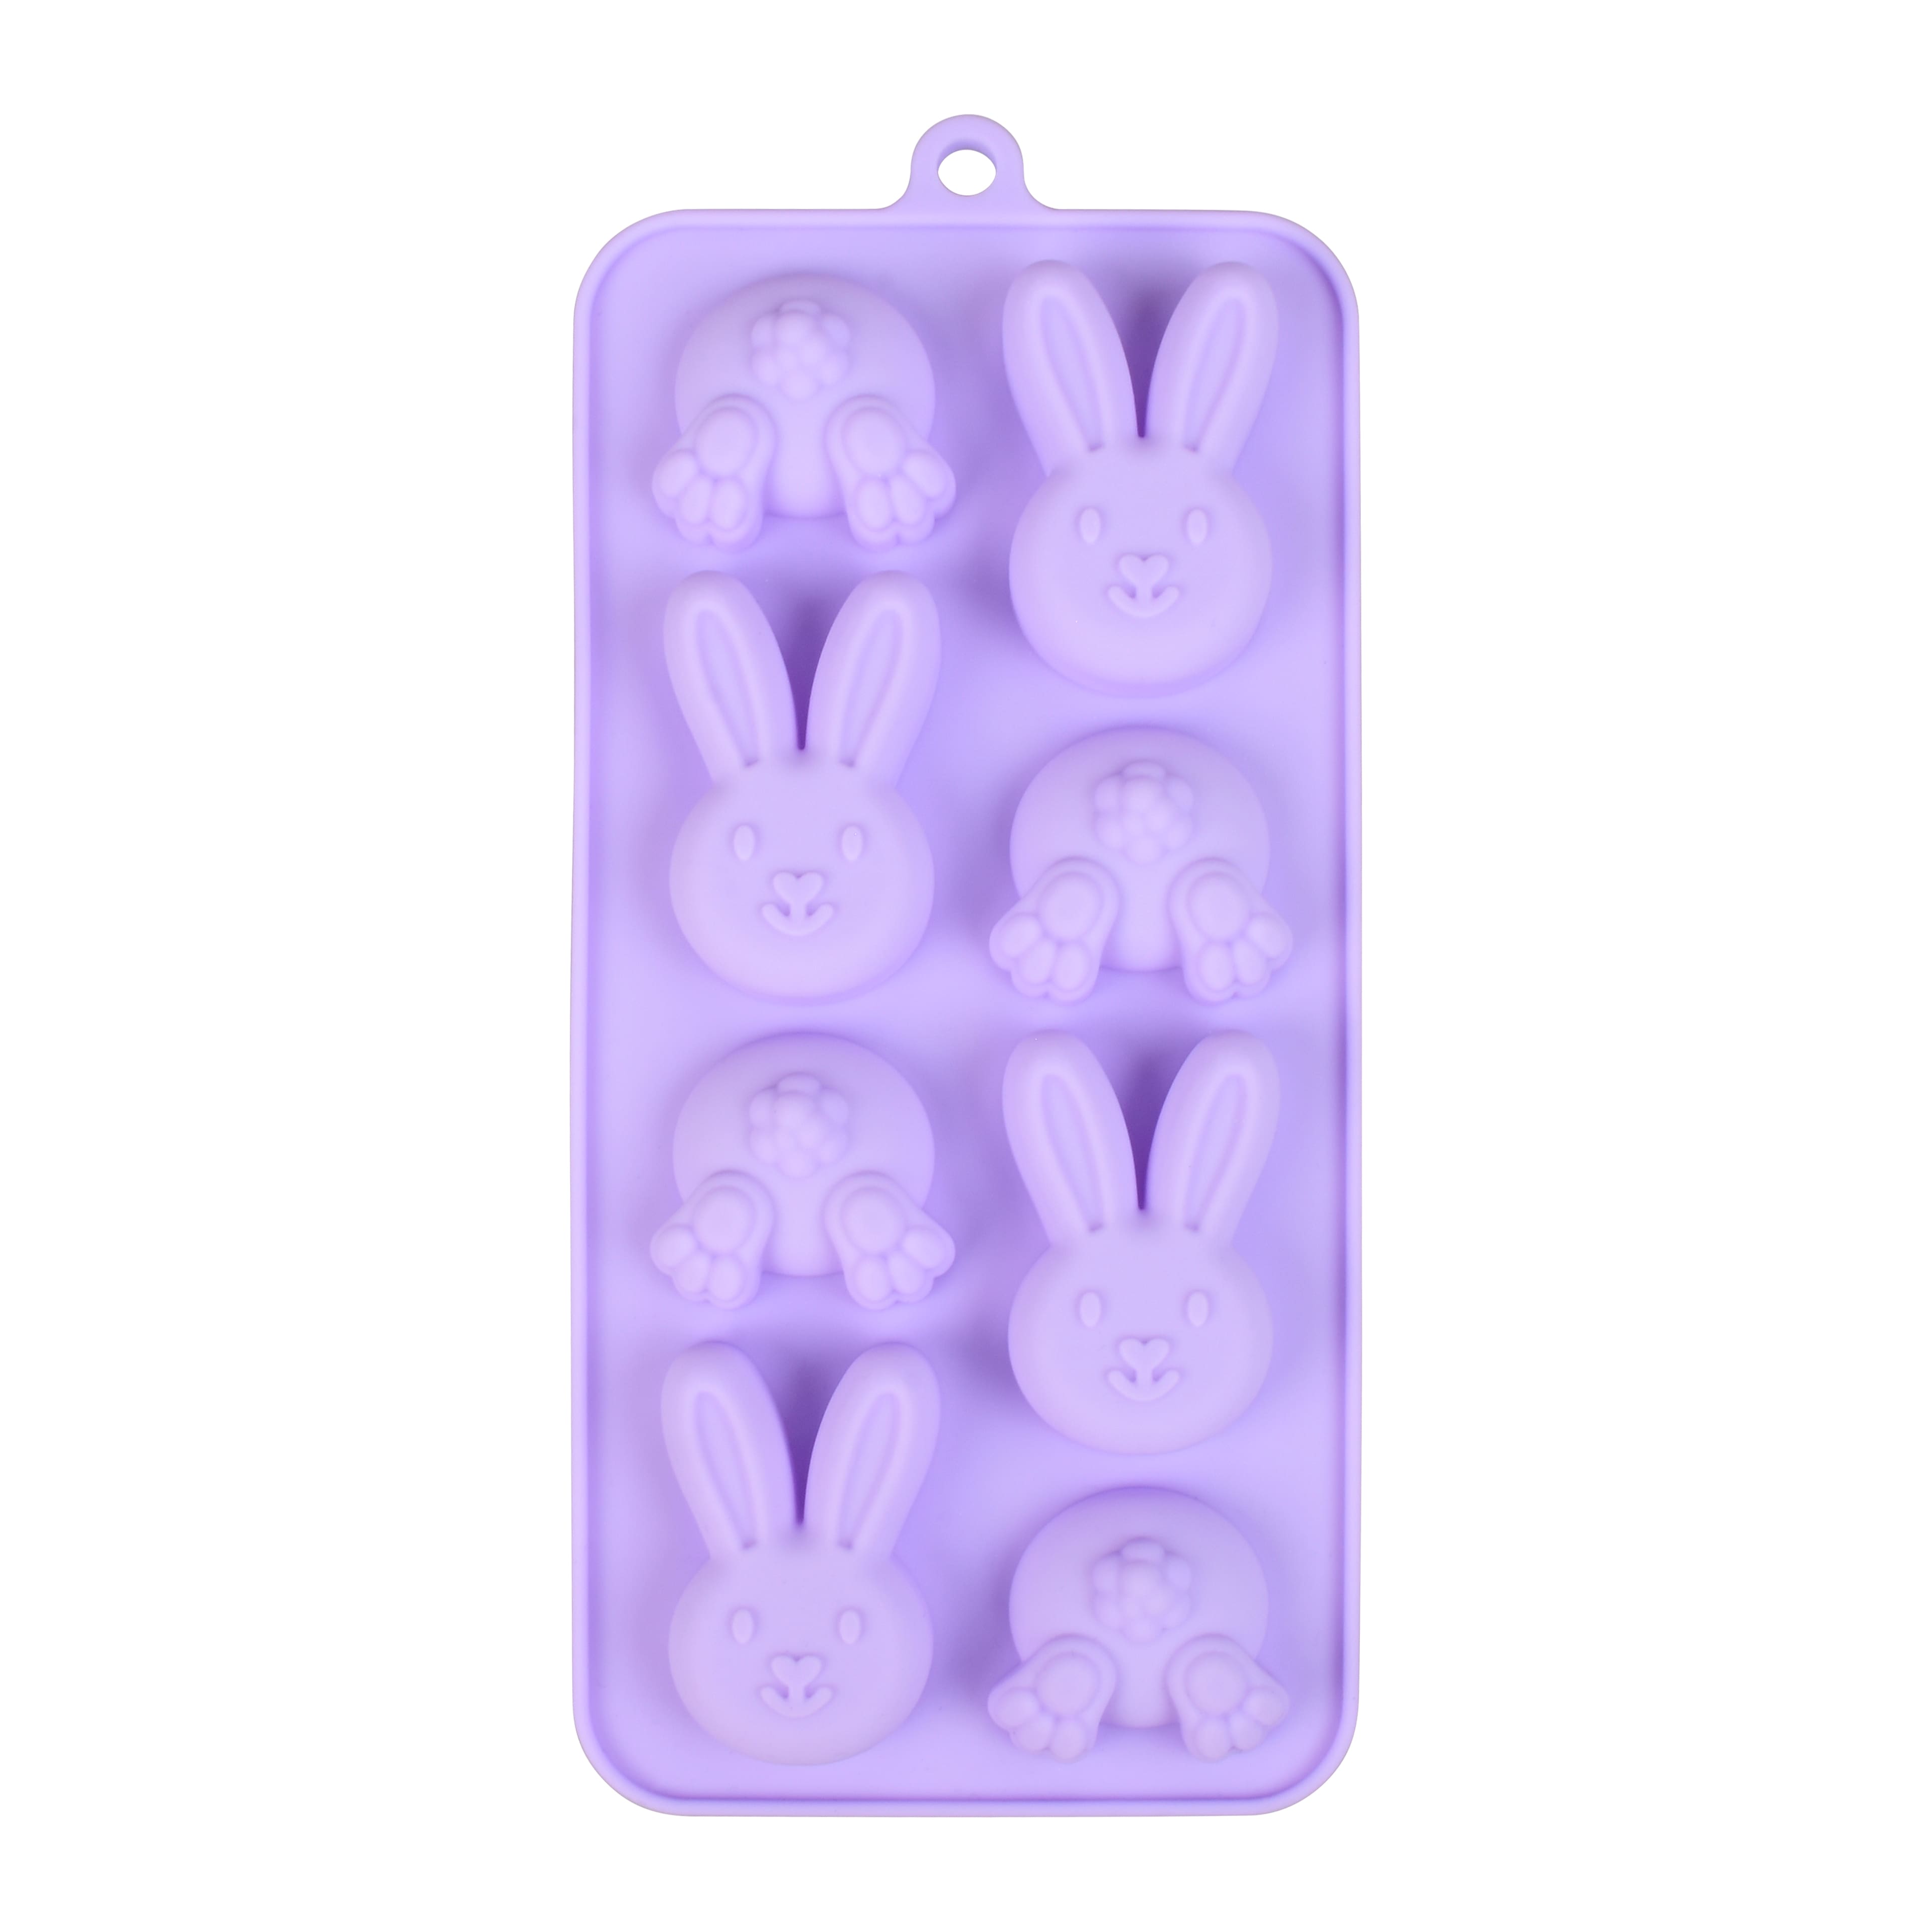 Bunny Butts & Heads Silicone Candy Mould by Celebrate It®